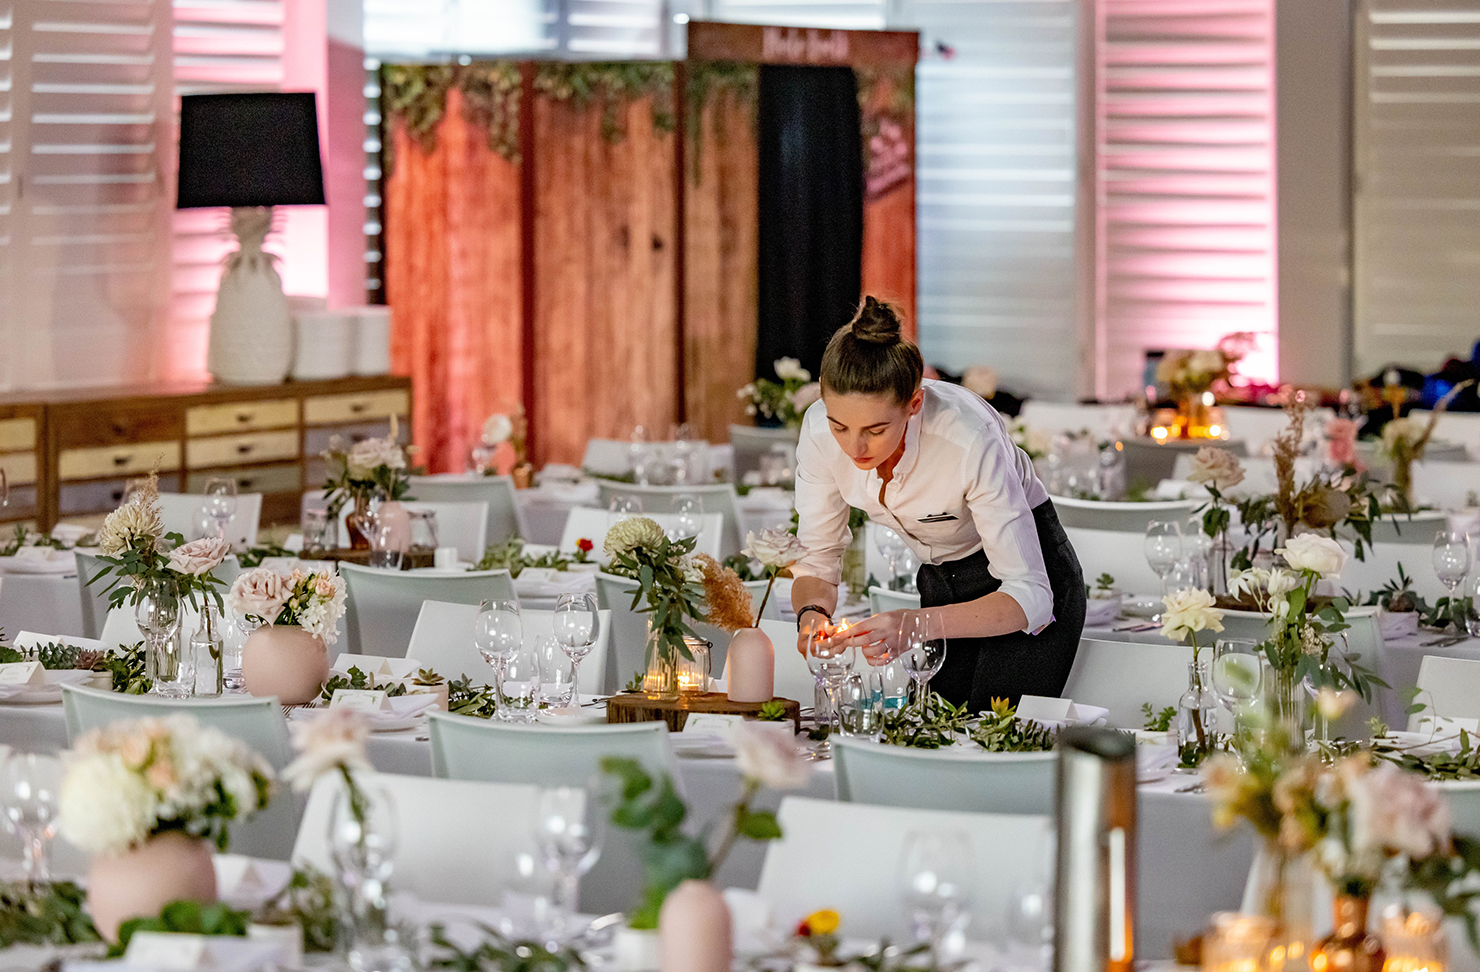 a caterer setting up the interior of a wedding venue